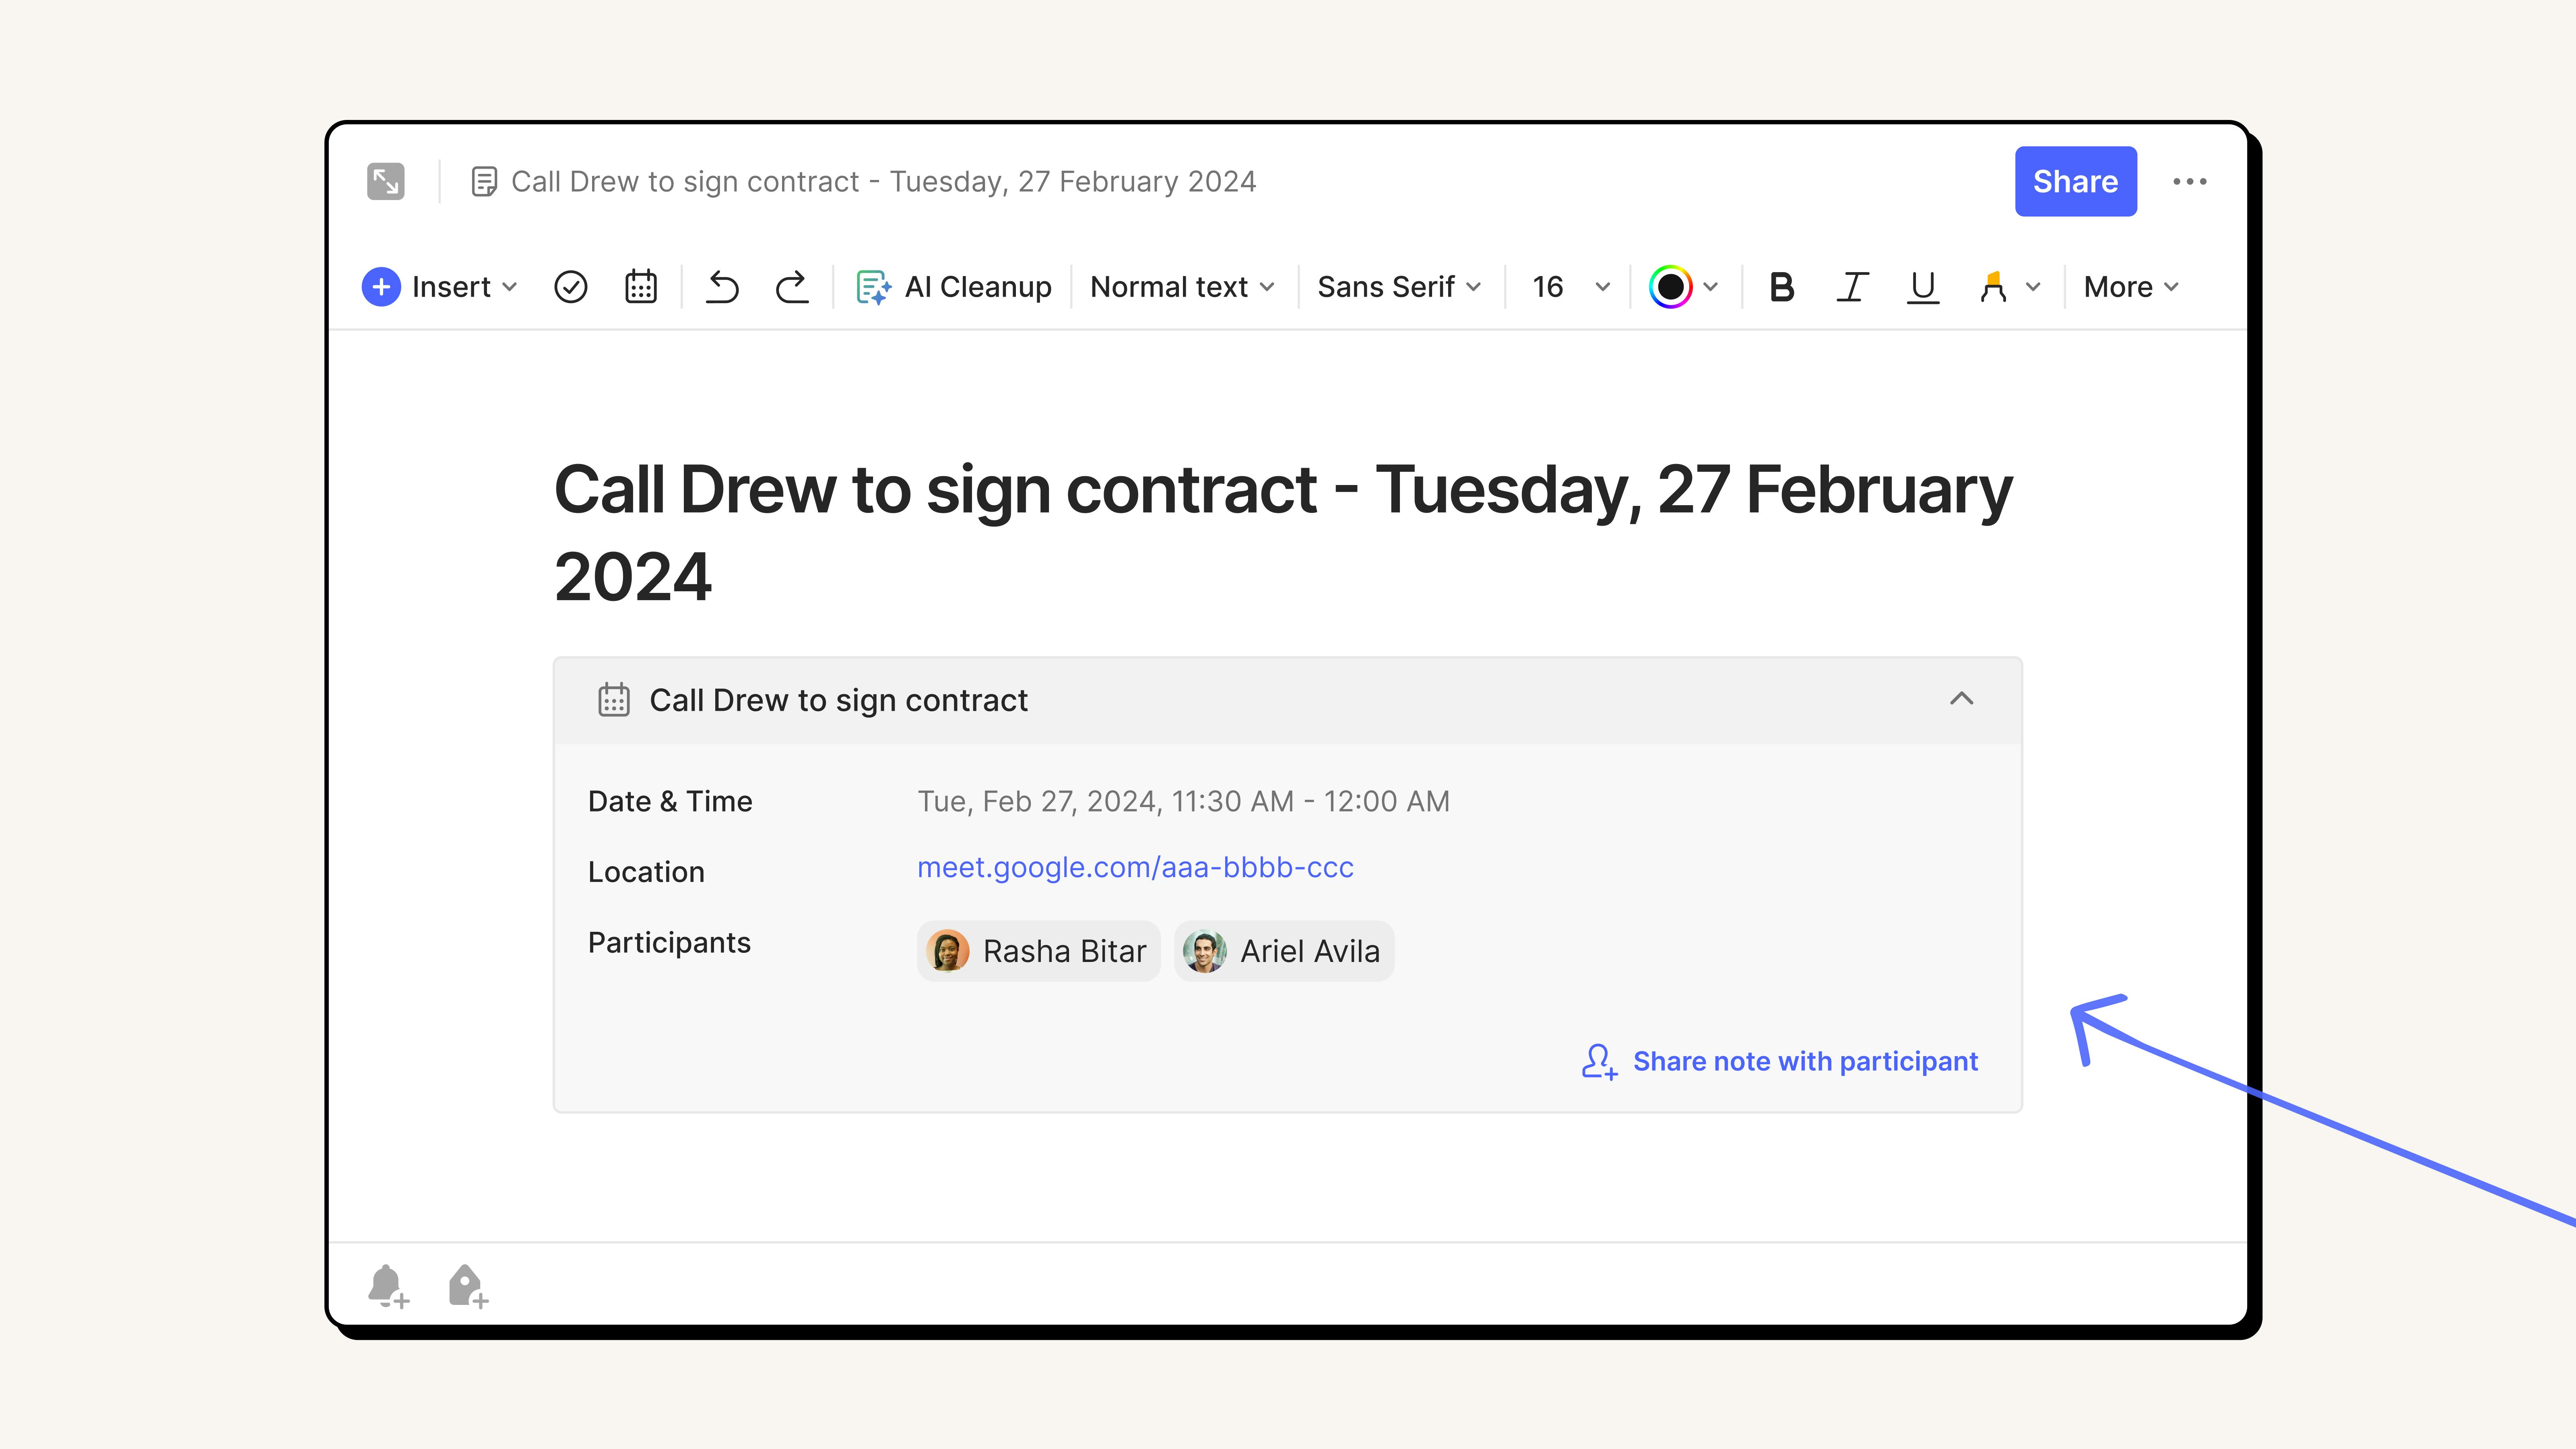 Microsoft Outlook Calendar - Event linked in note